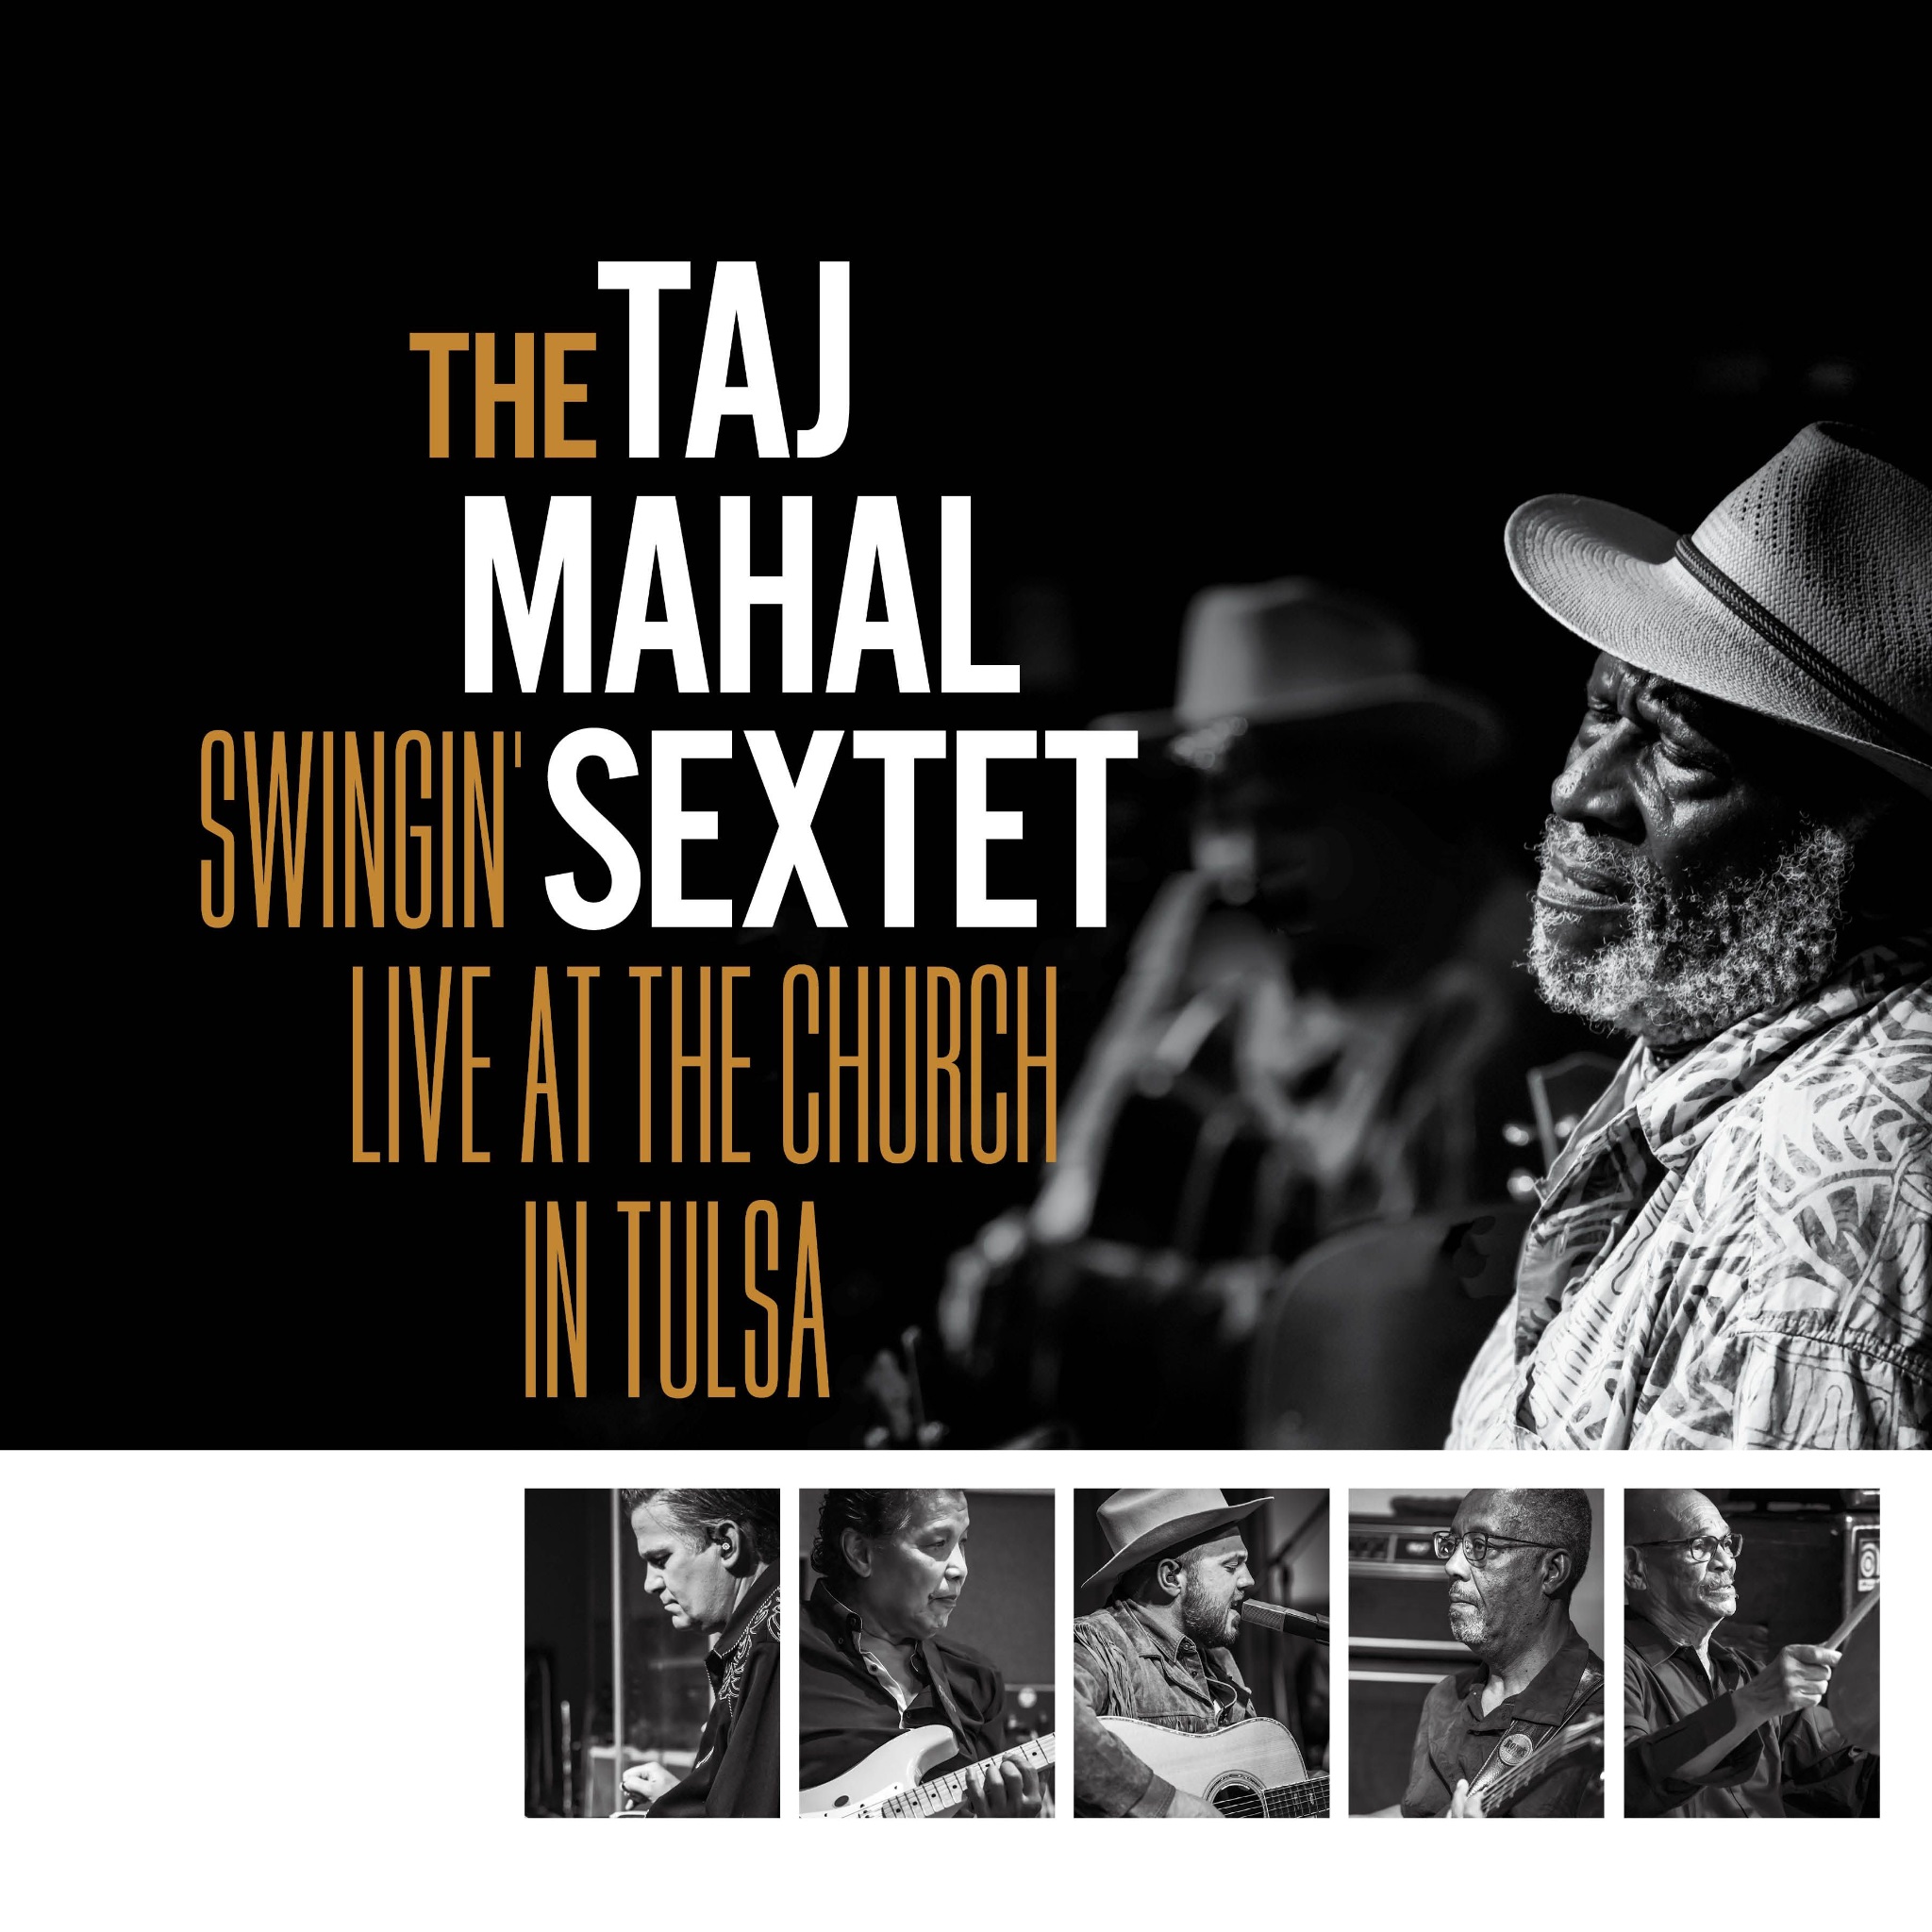 Taj Mahal to release single "Queen Bee" + announce new live album celebrating Tulsa music scene and the late great Leon Russell